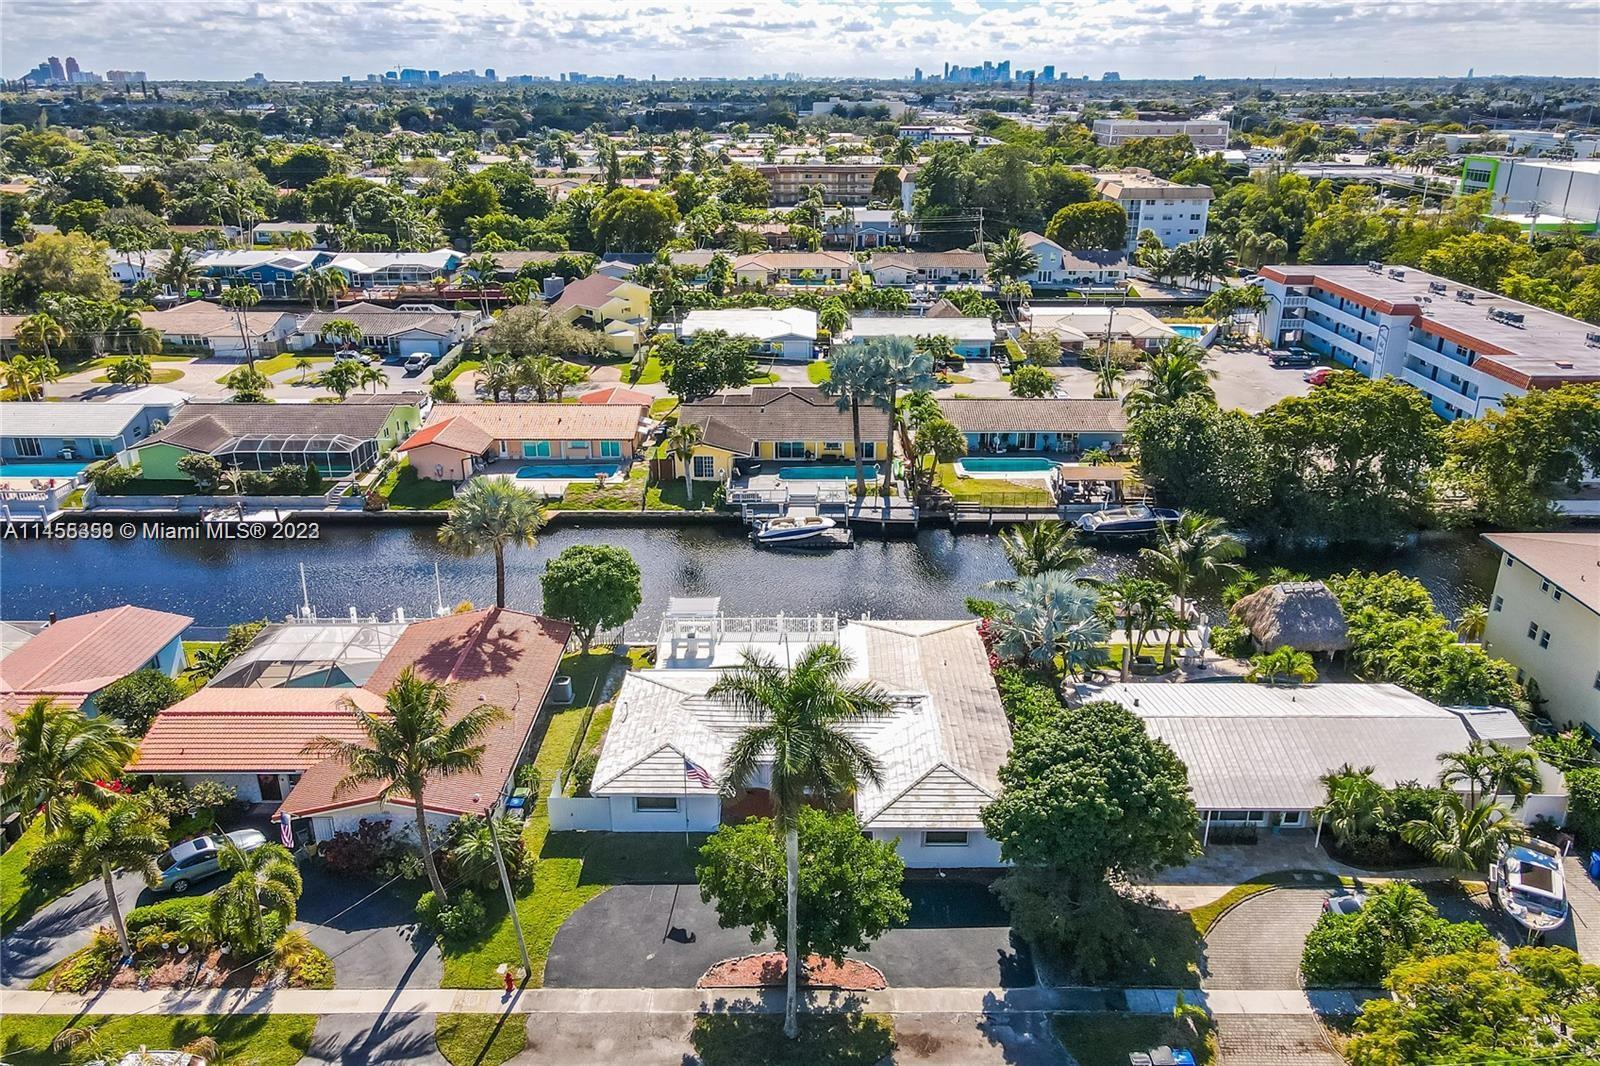 View Fort Lauderdale, FL 33334 house